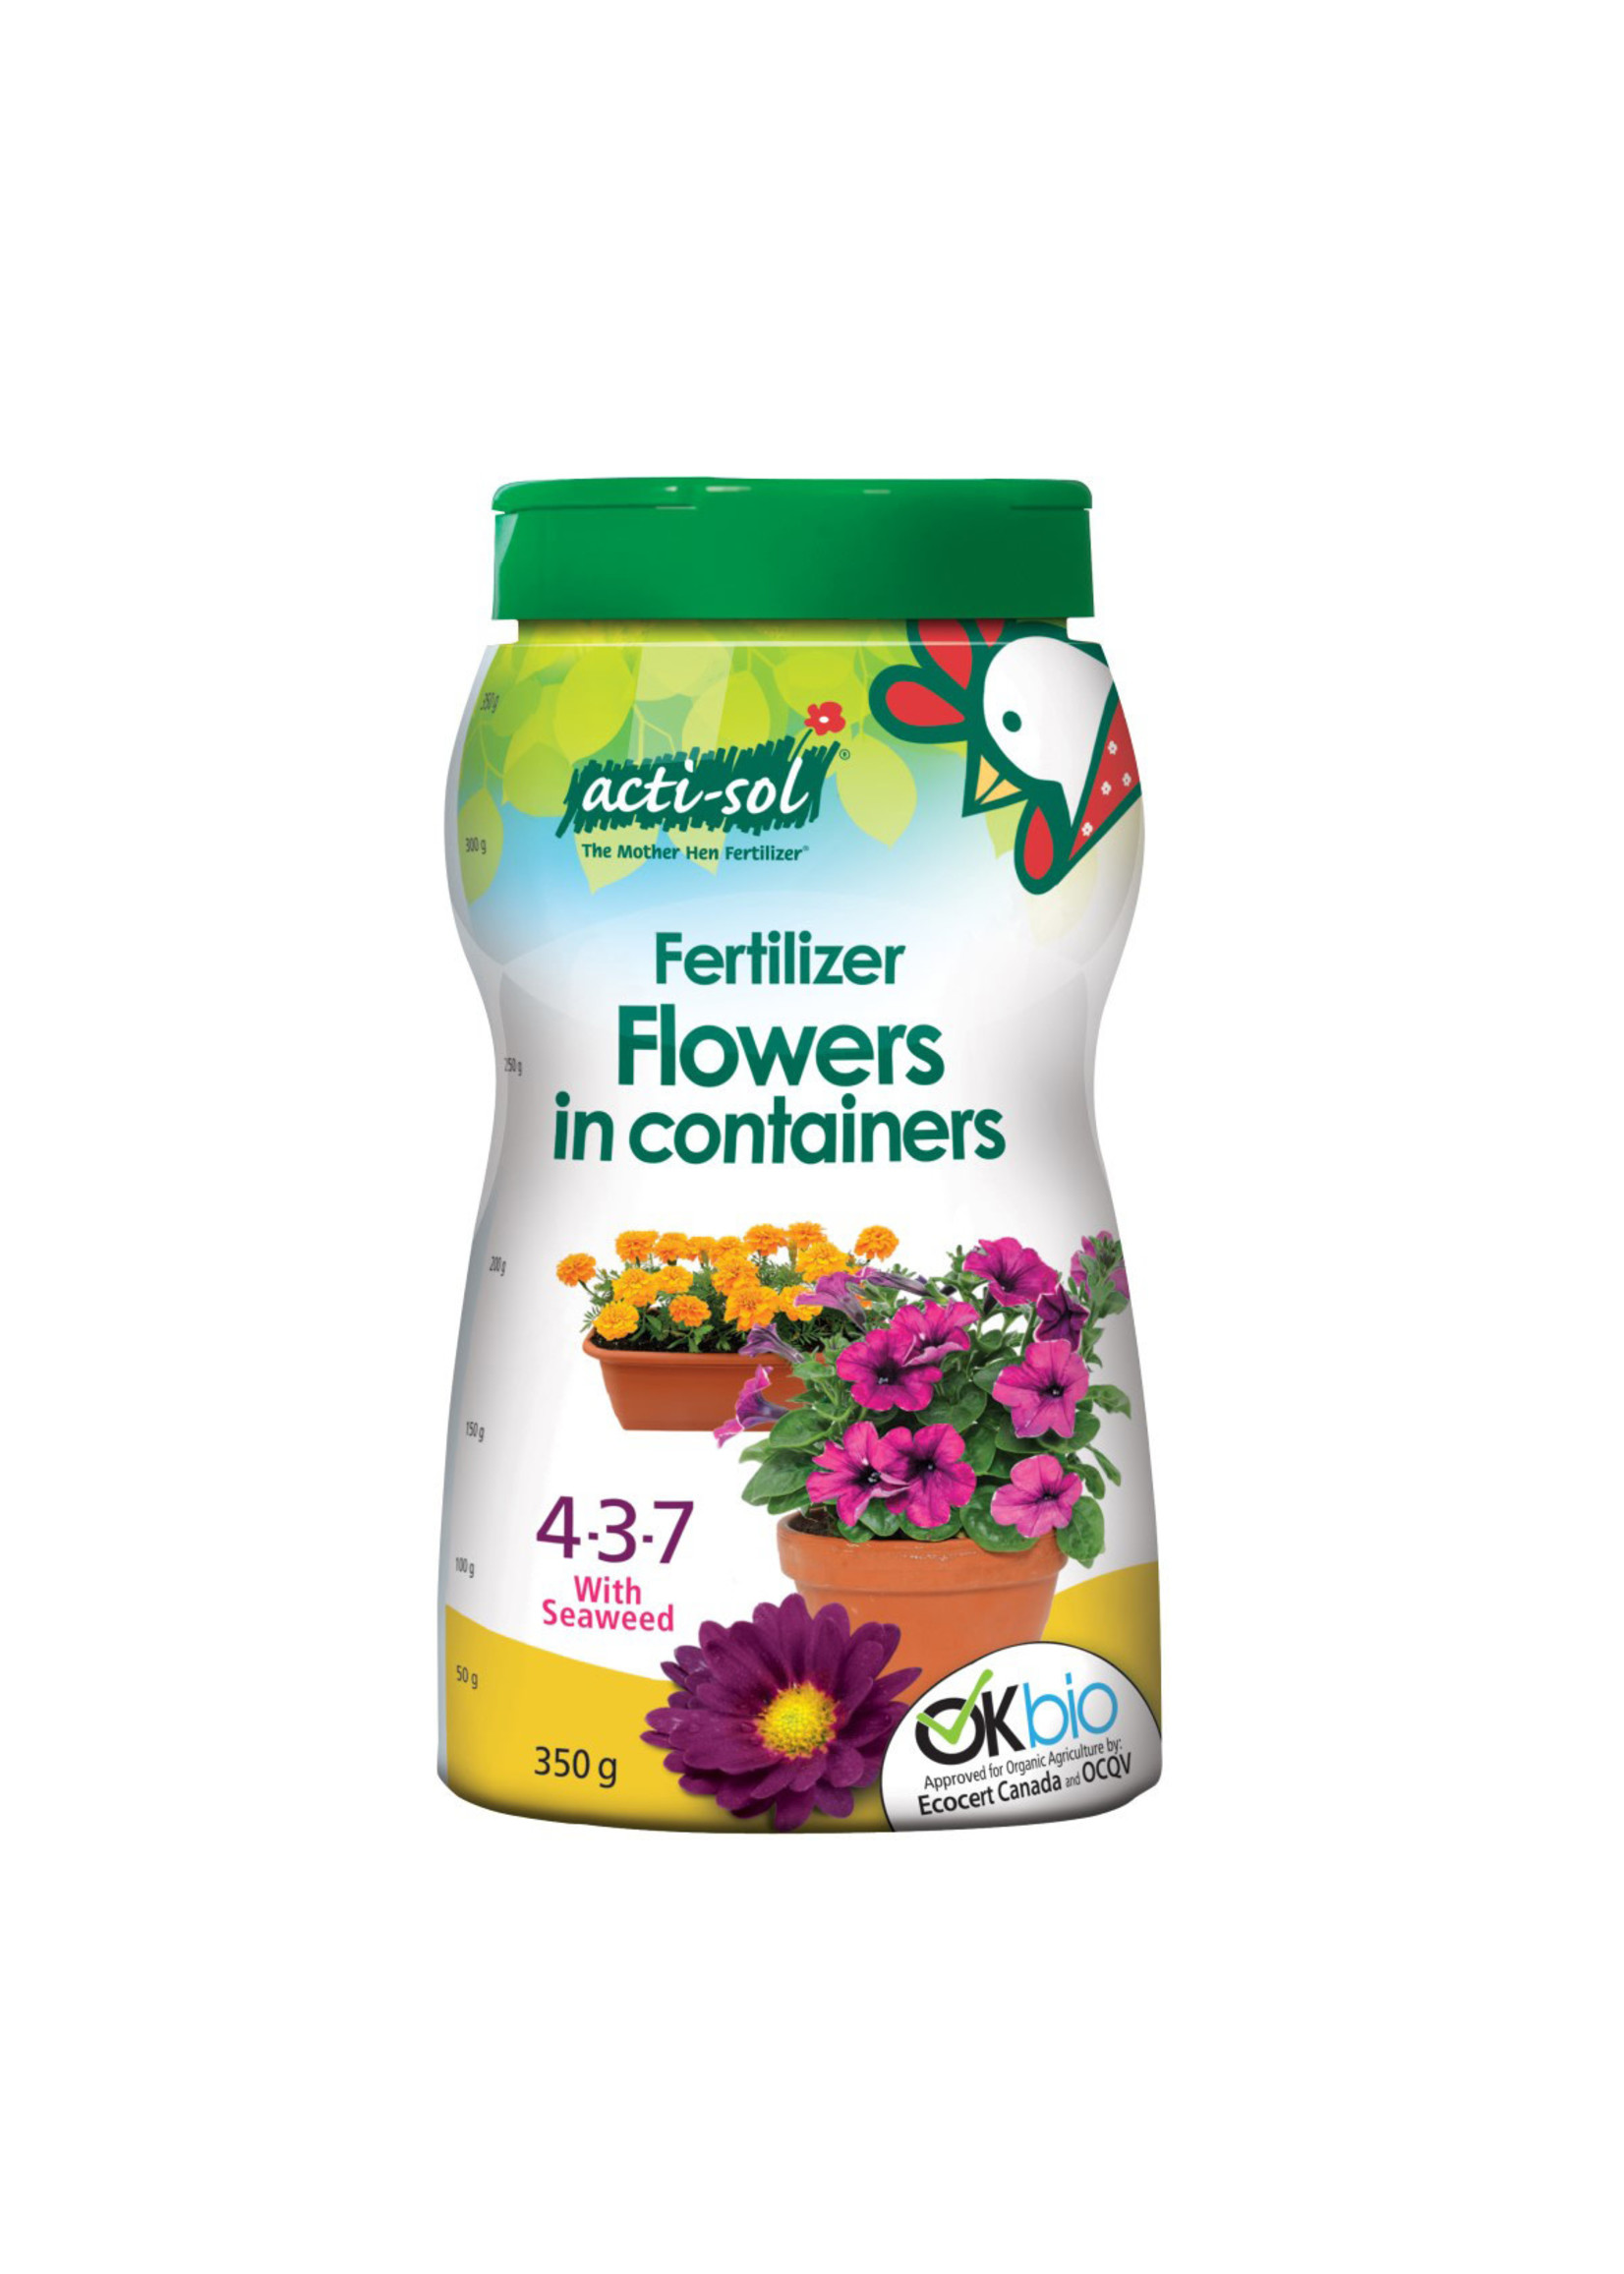 Acti-sol Acti-Sol Flowers in Containers 4-3-7  350g